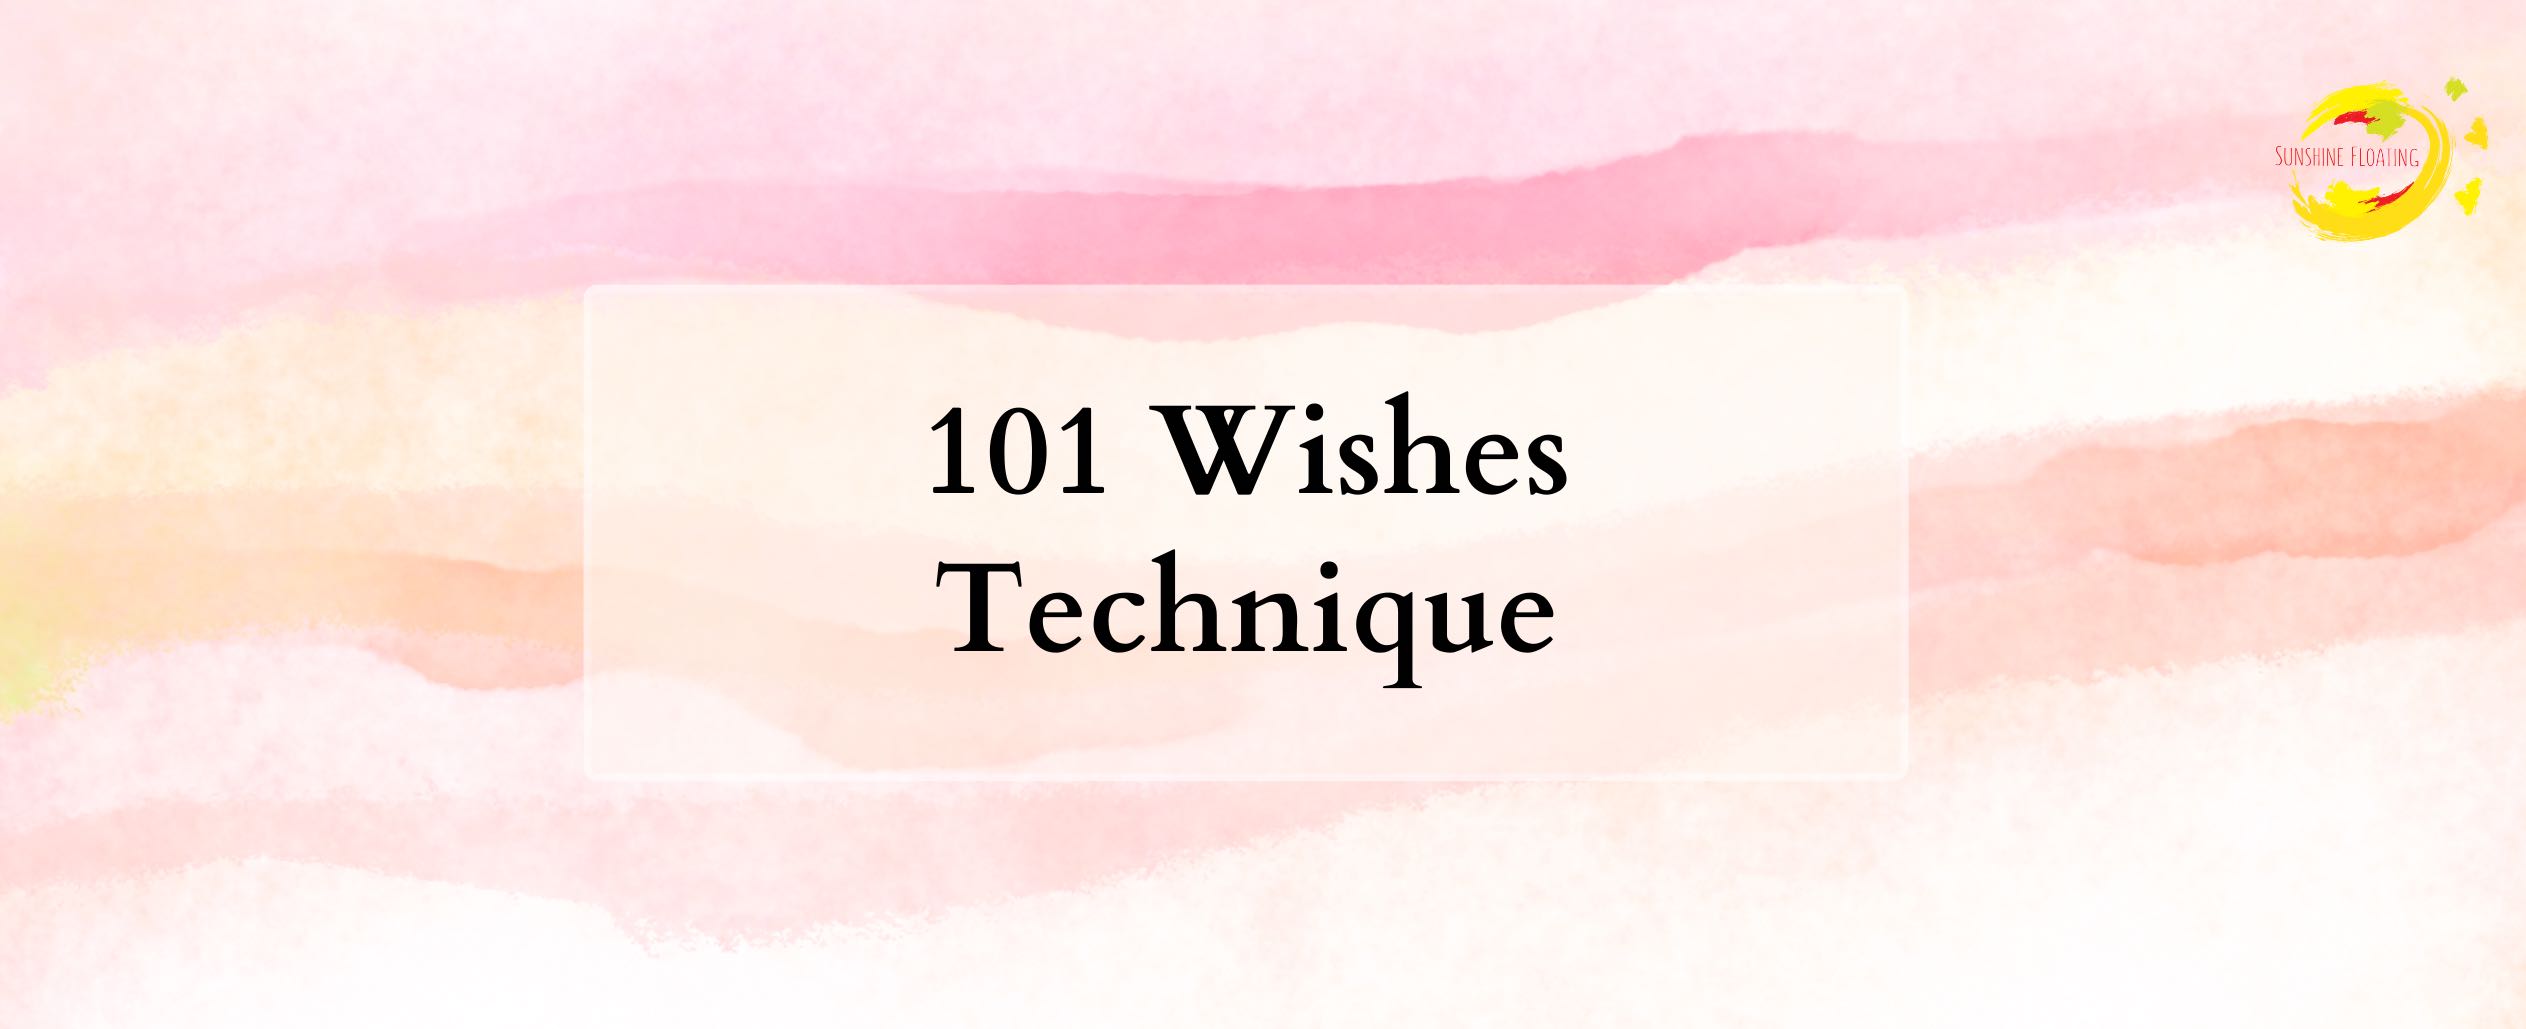 101-wishes-tachnique-free-wellbeing-resources-sunshinefloating